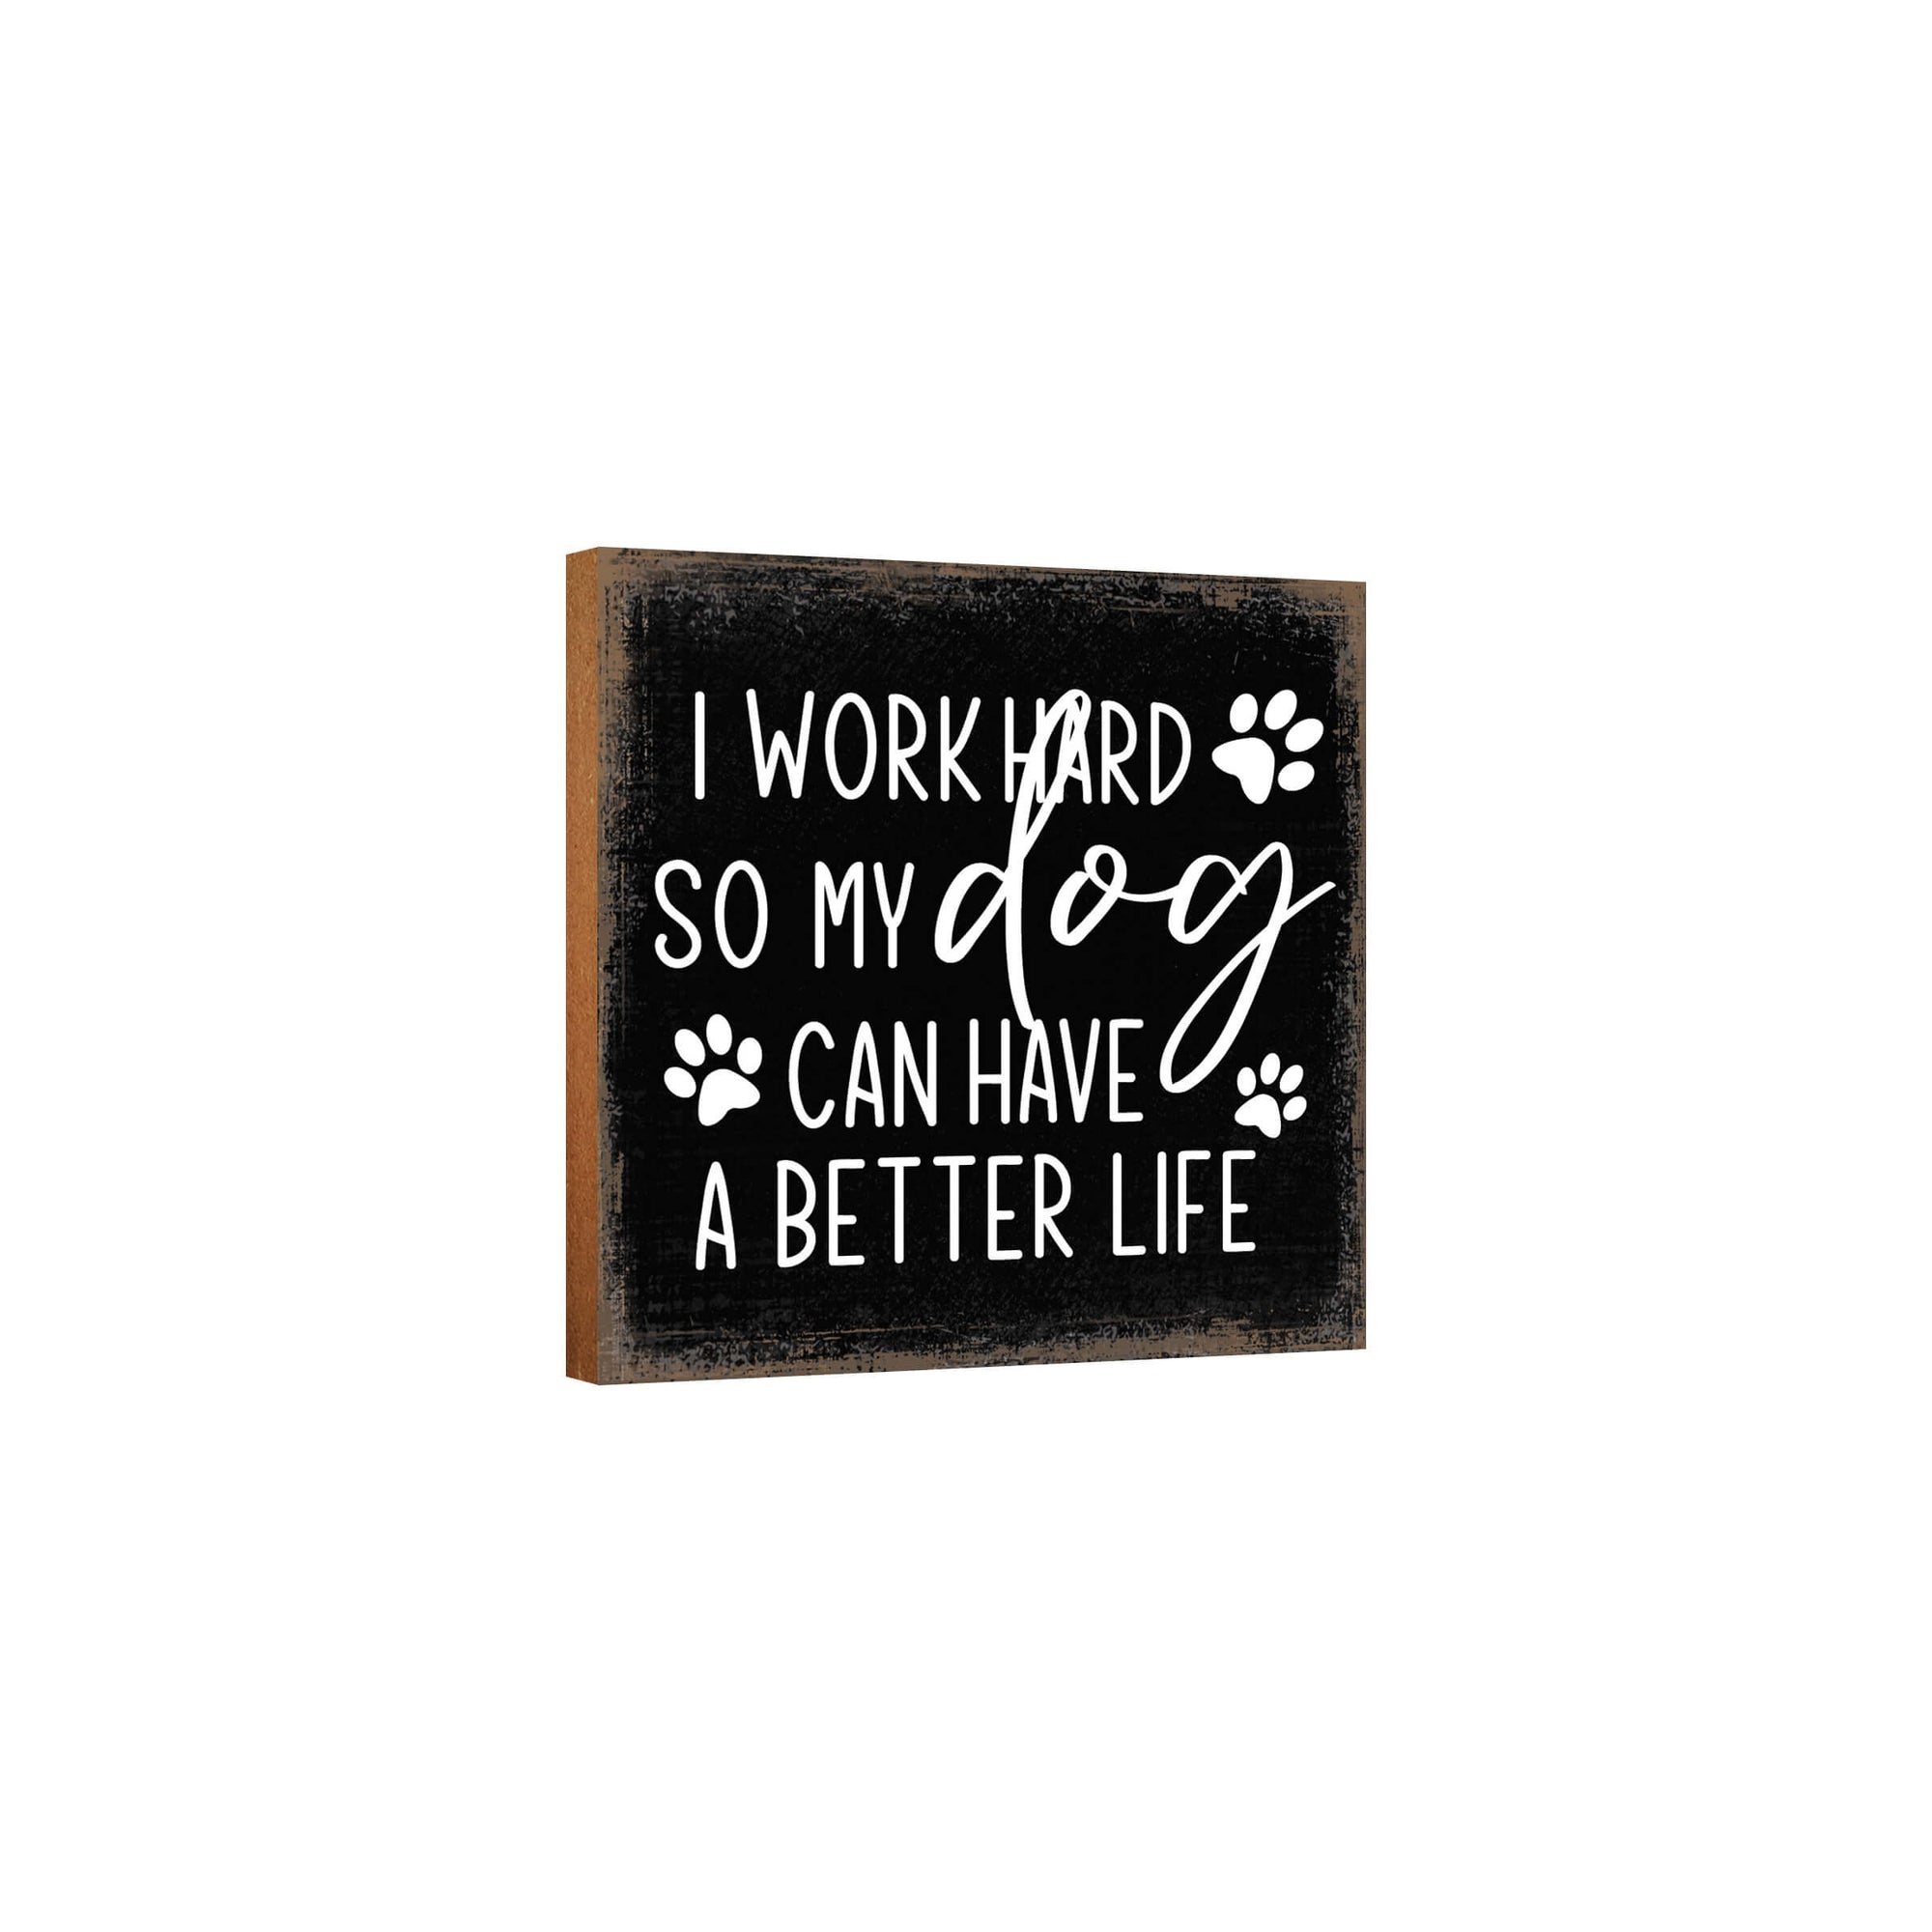 Wooden Shelf Decor and Tabletop Signs with Pet Verses - I Work Hard